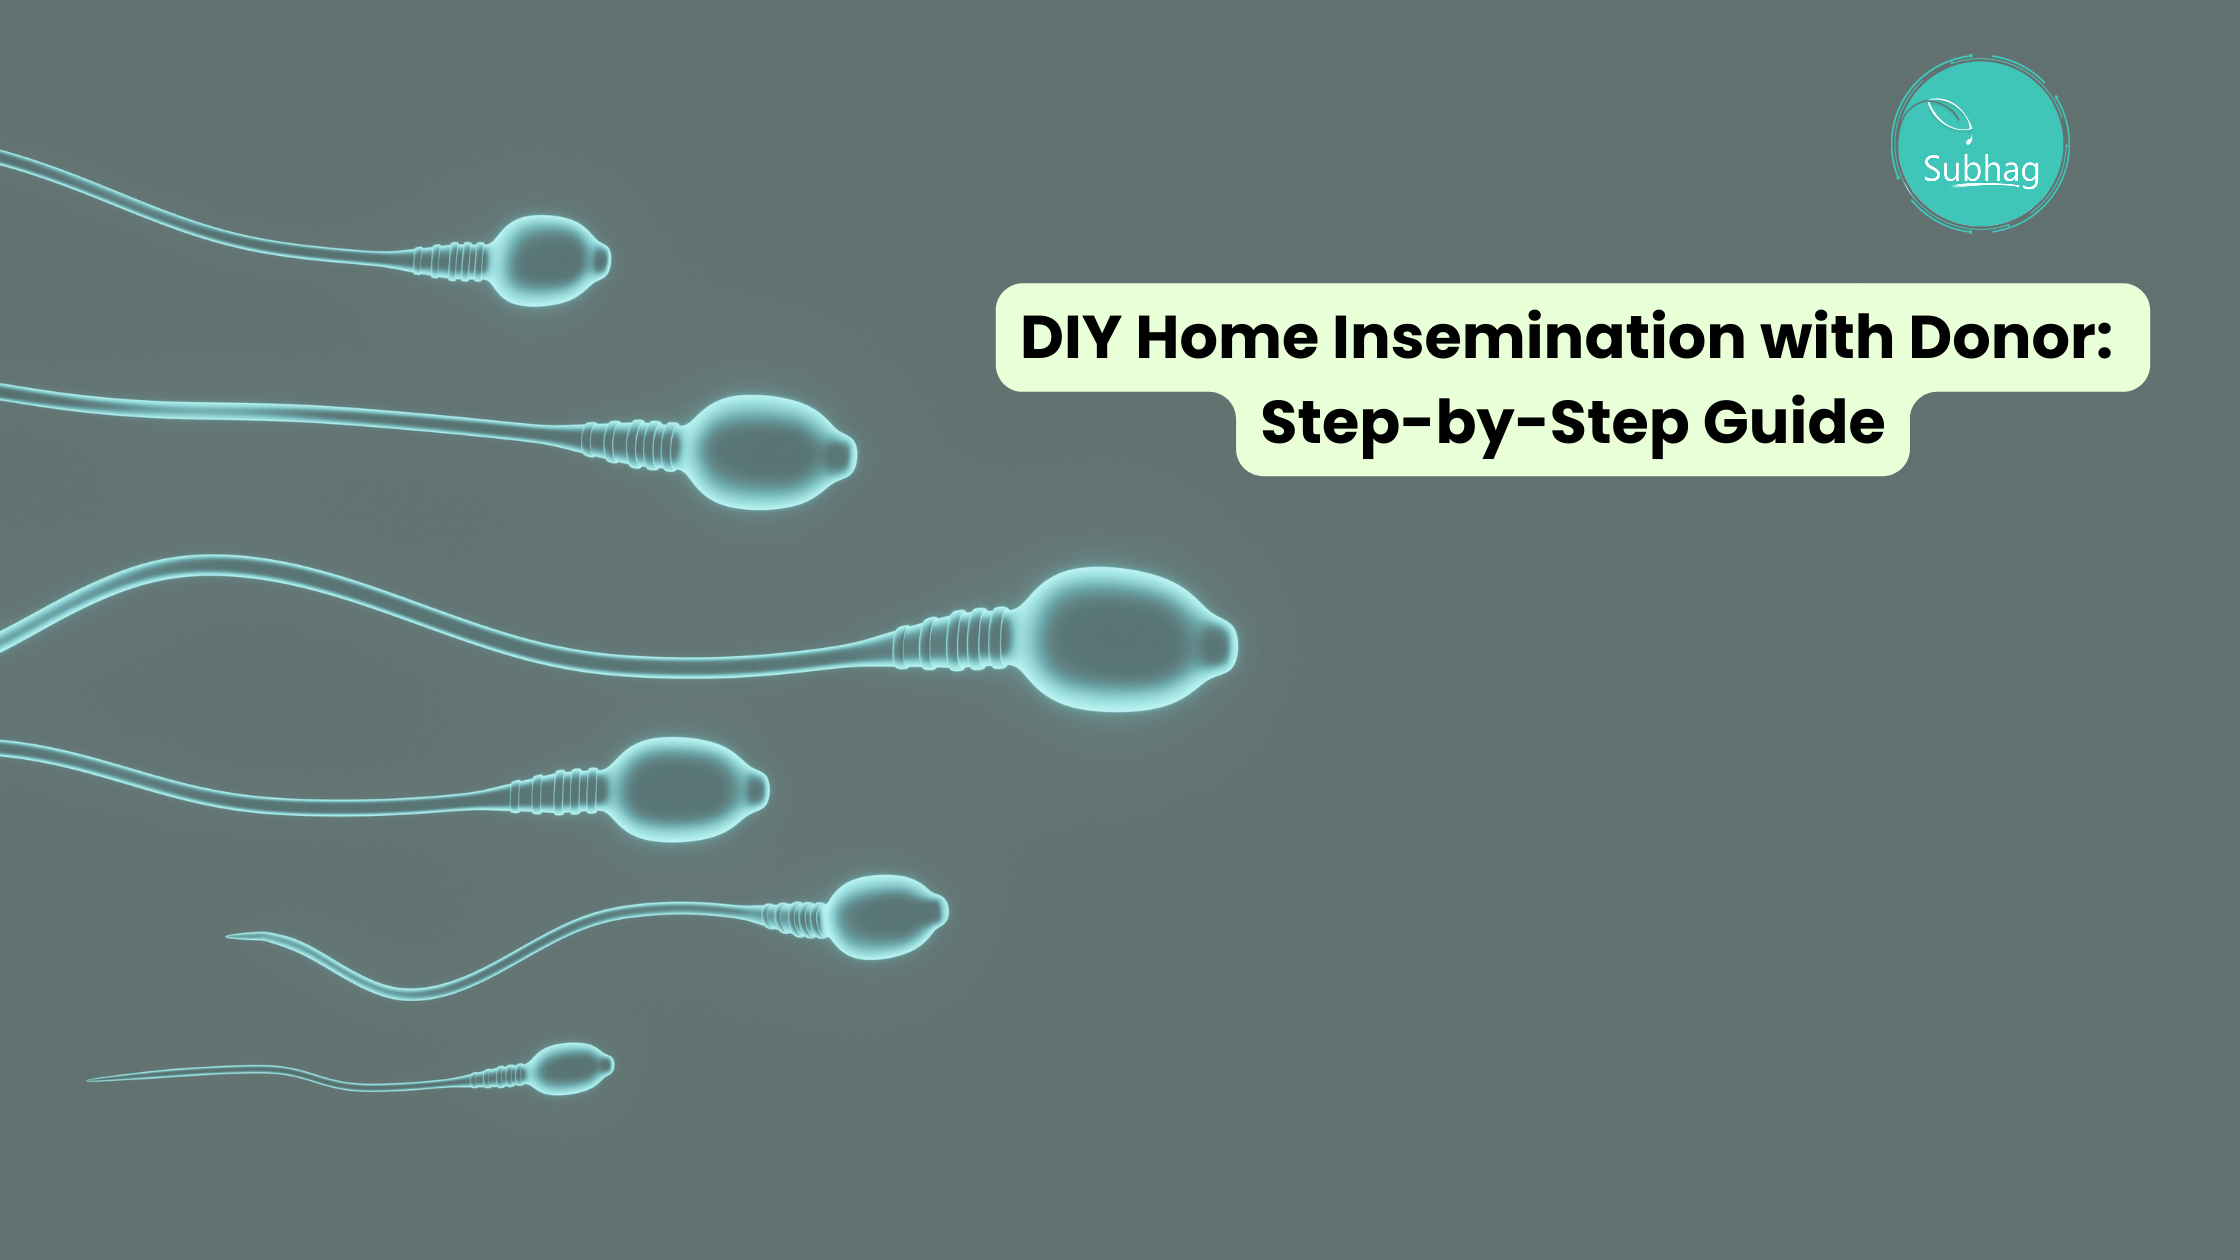 DIY Home Insemination with Donor Step-by-Step Guide